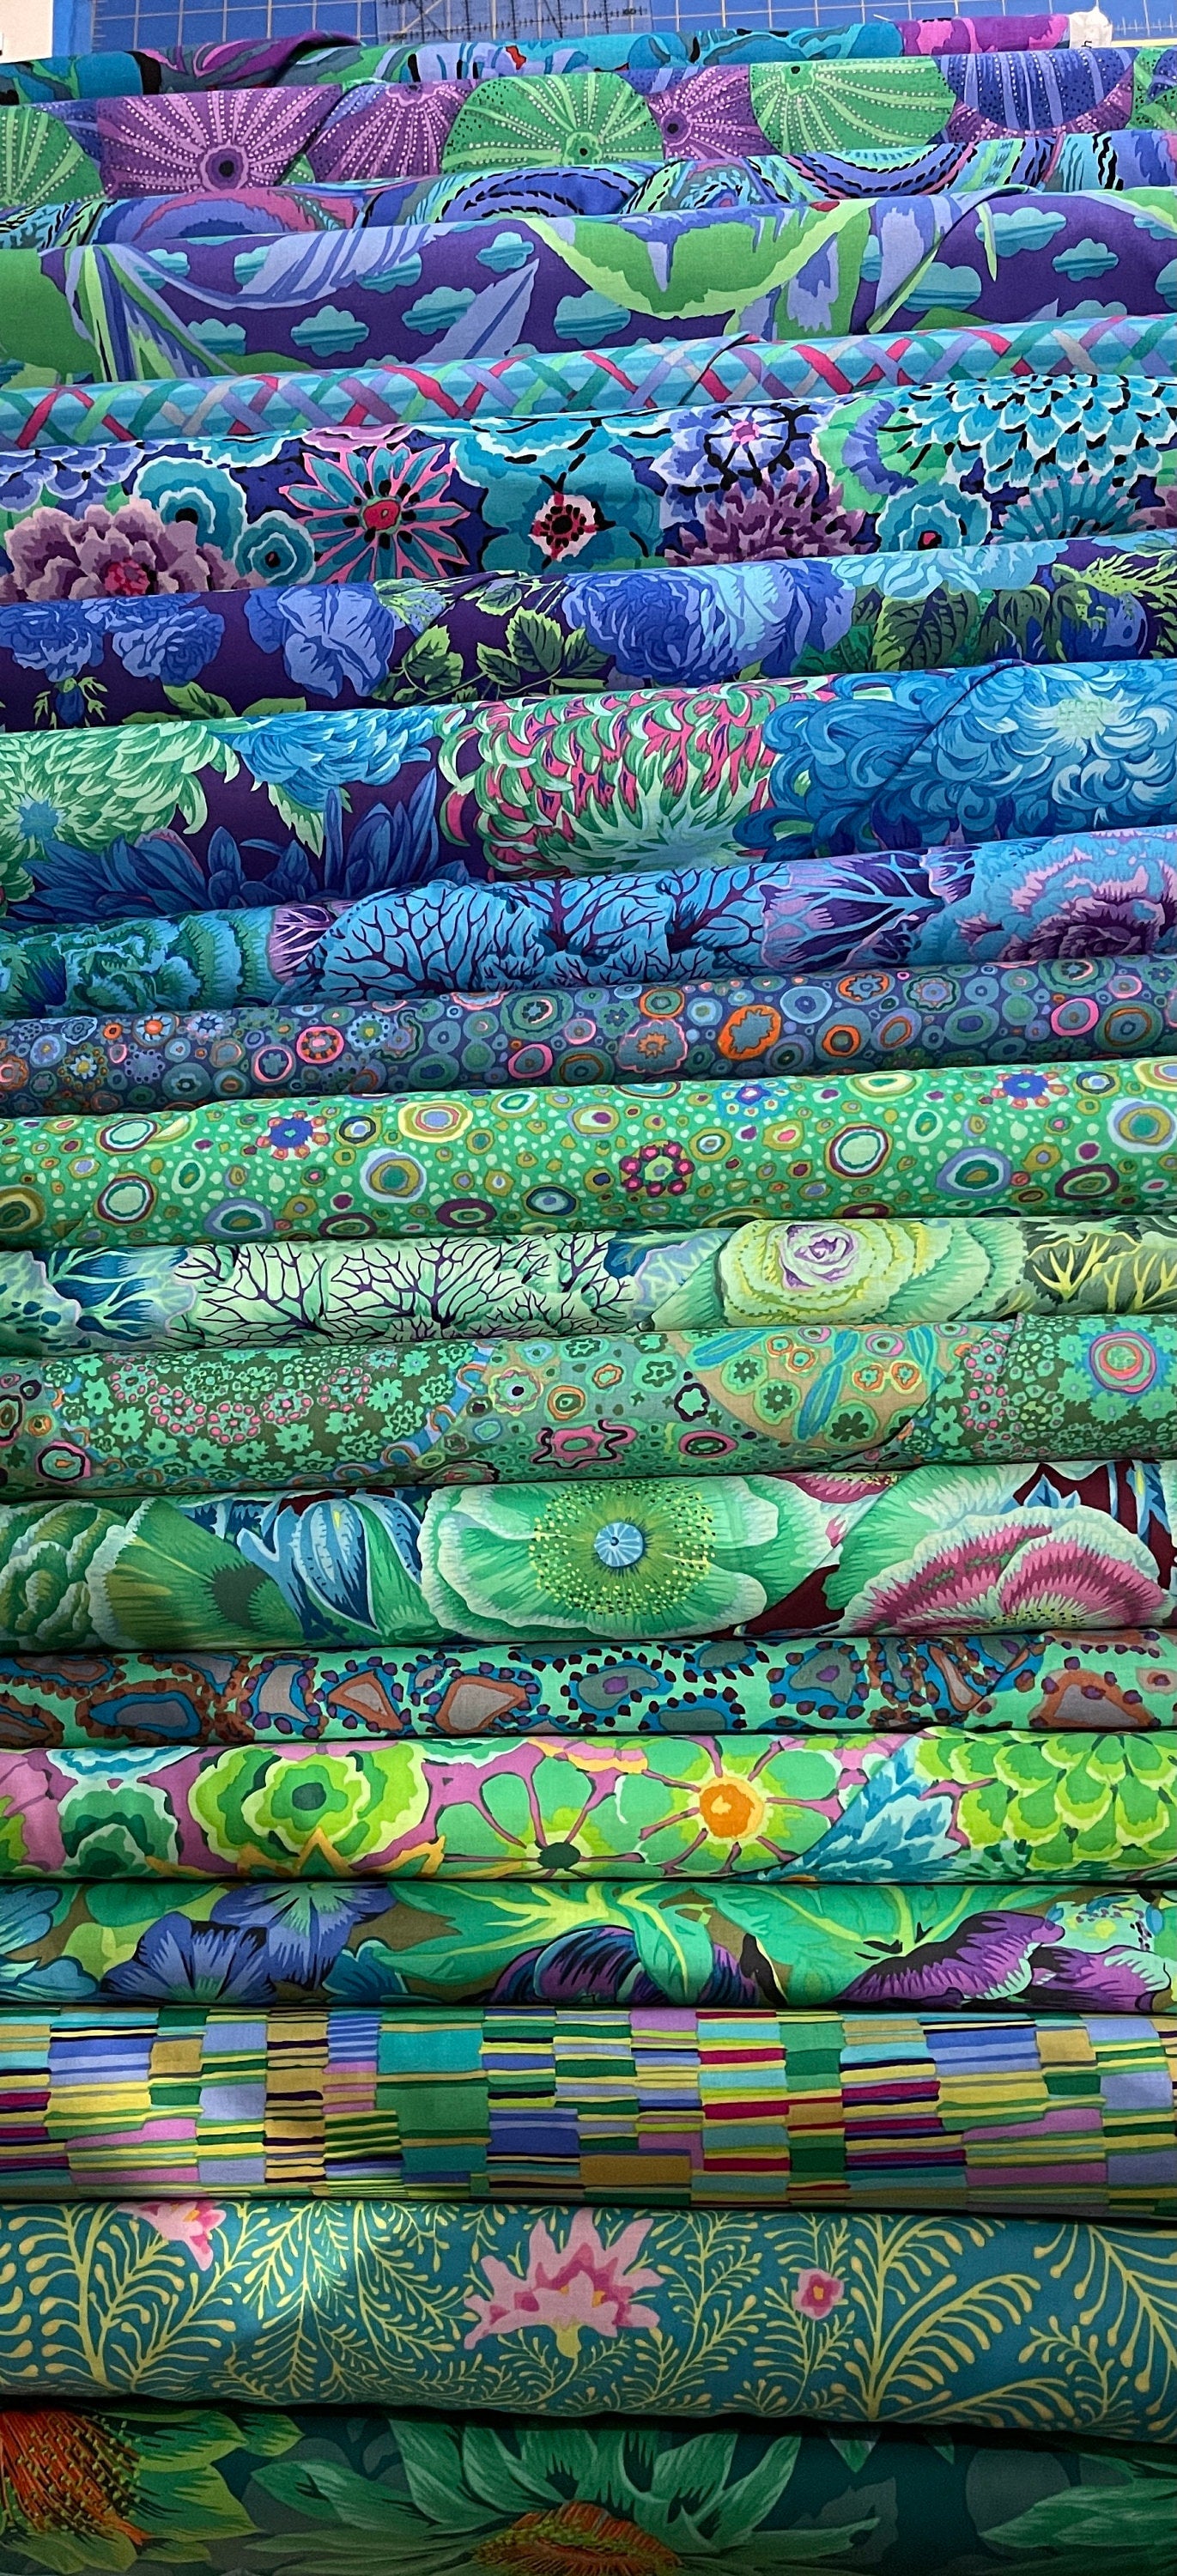 FLOWER BOXES Quilt Fabric Pack - Kaffe Fassett Collective - Quilts